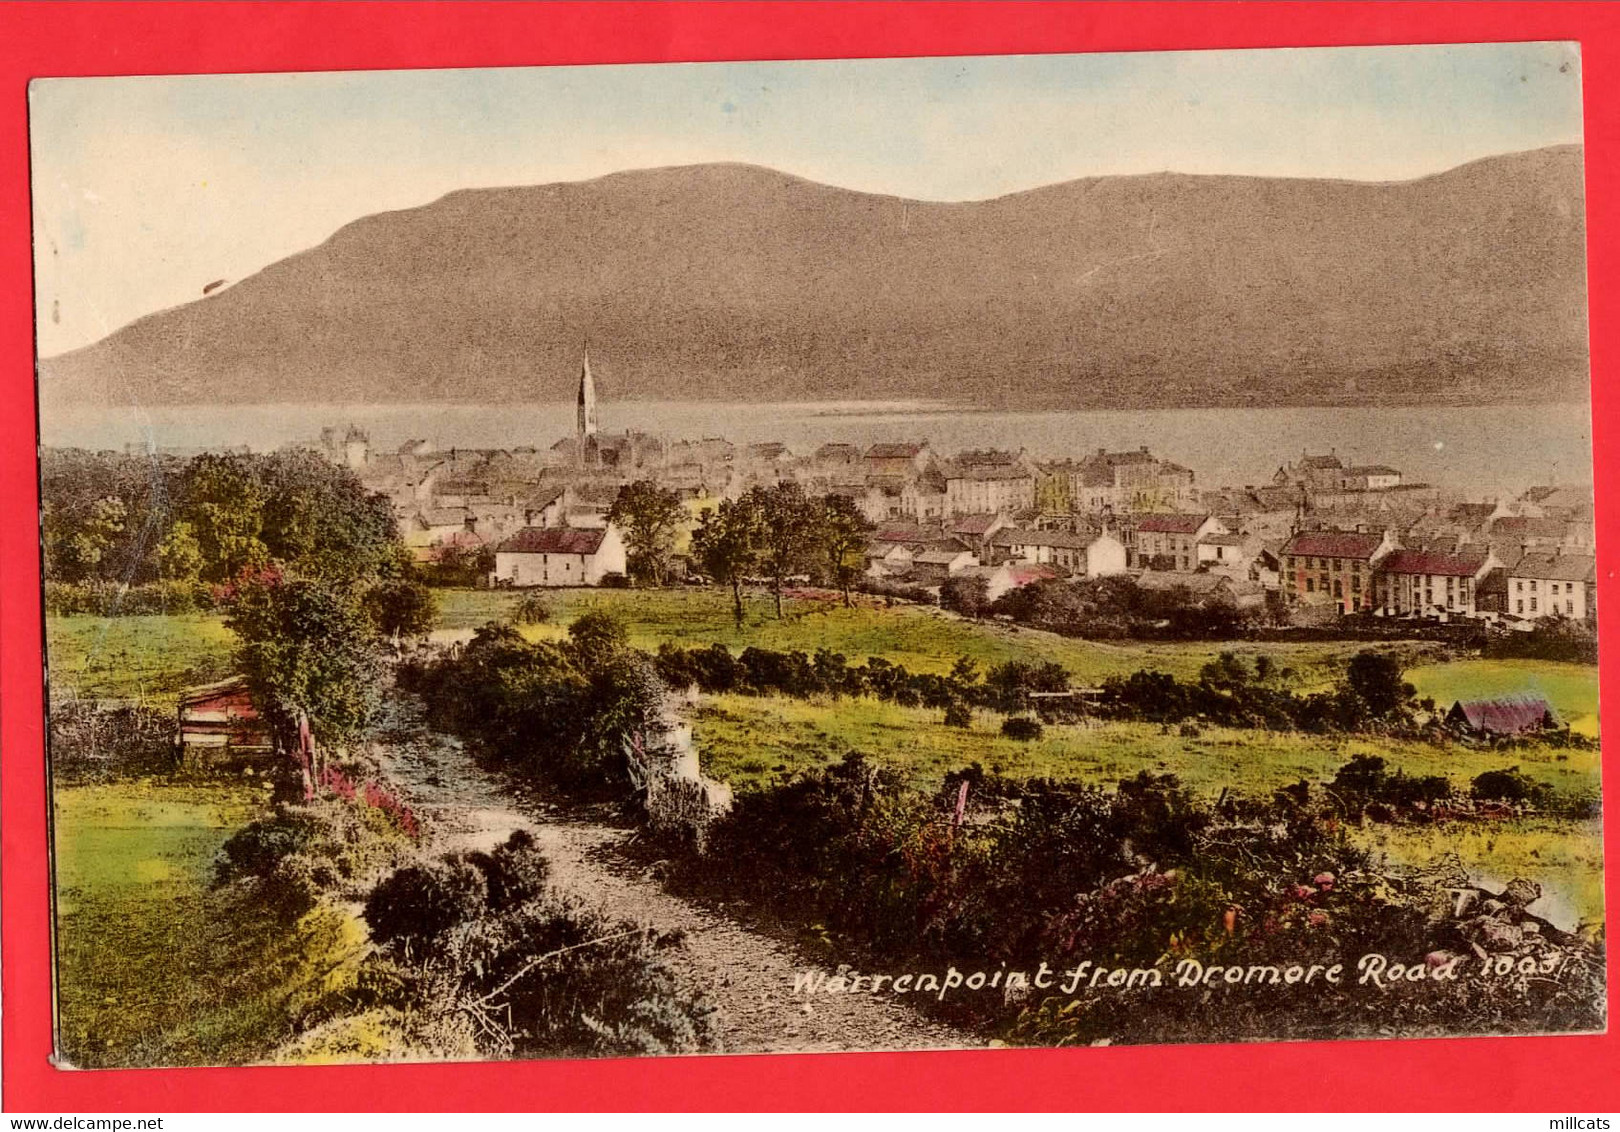 N IRELAND CO DOWN WARRENPOINT  FROM DROMORE RD Pu 1953 - Down